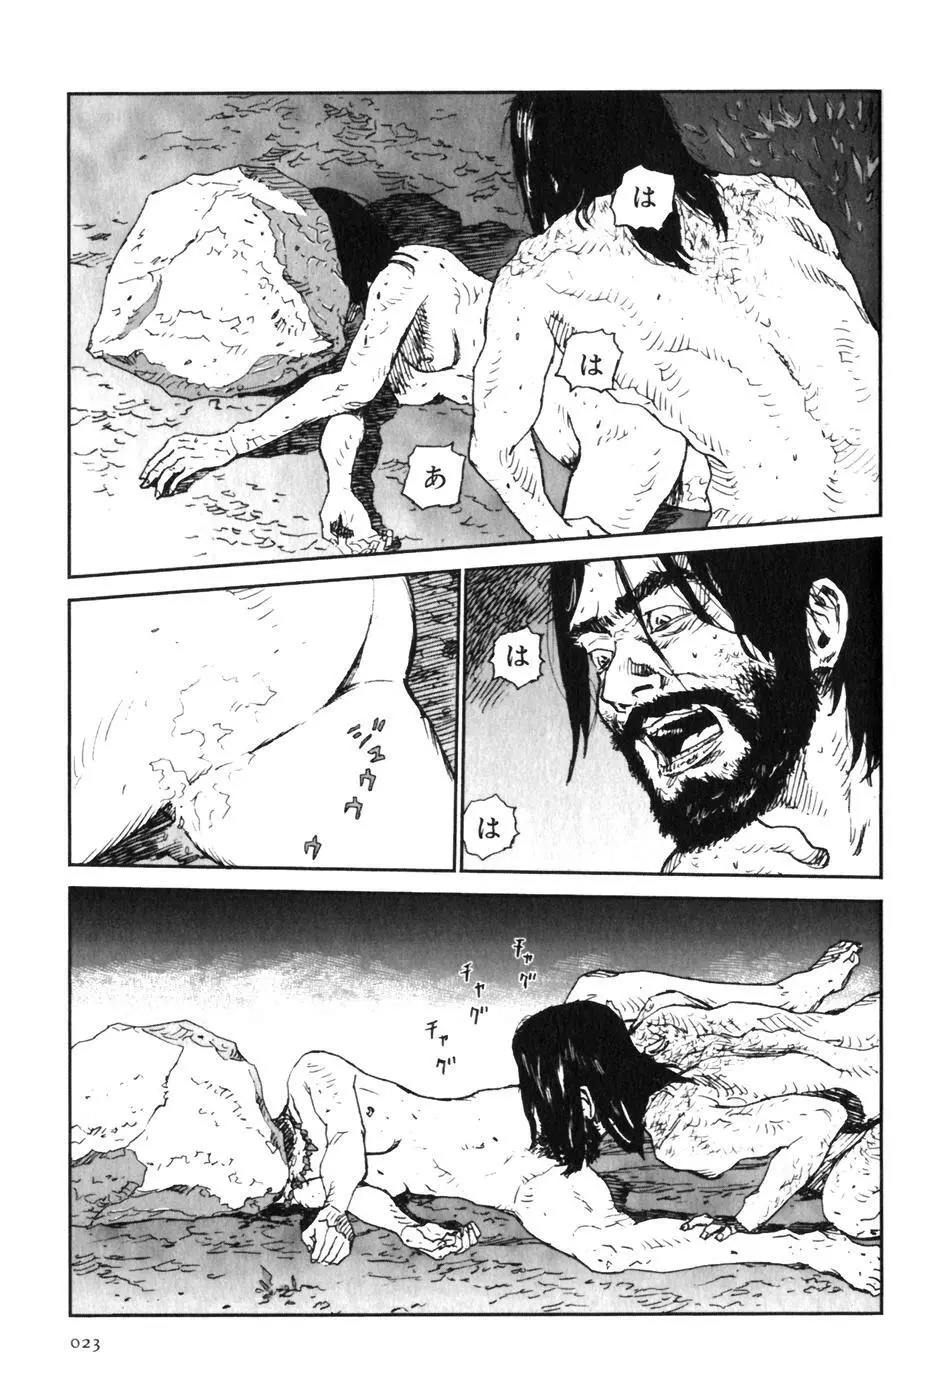 Does anyone know the source of these manga? R18-G 6ページ